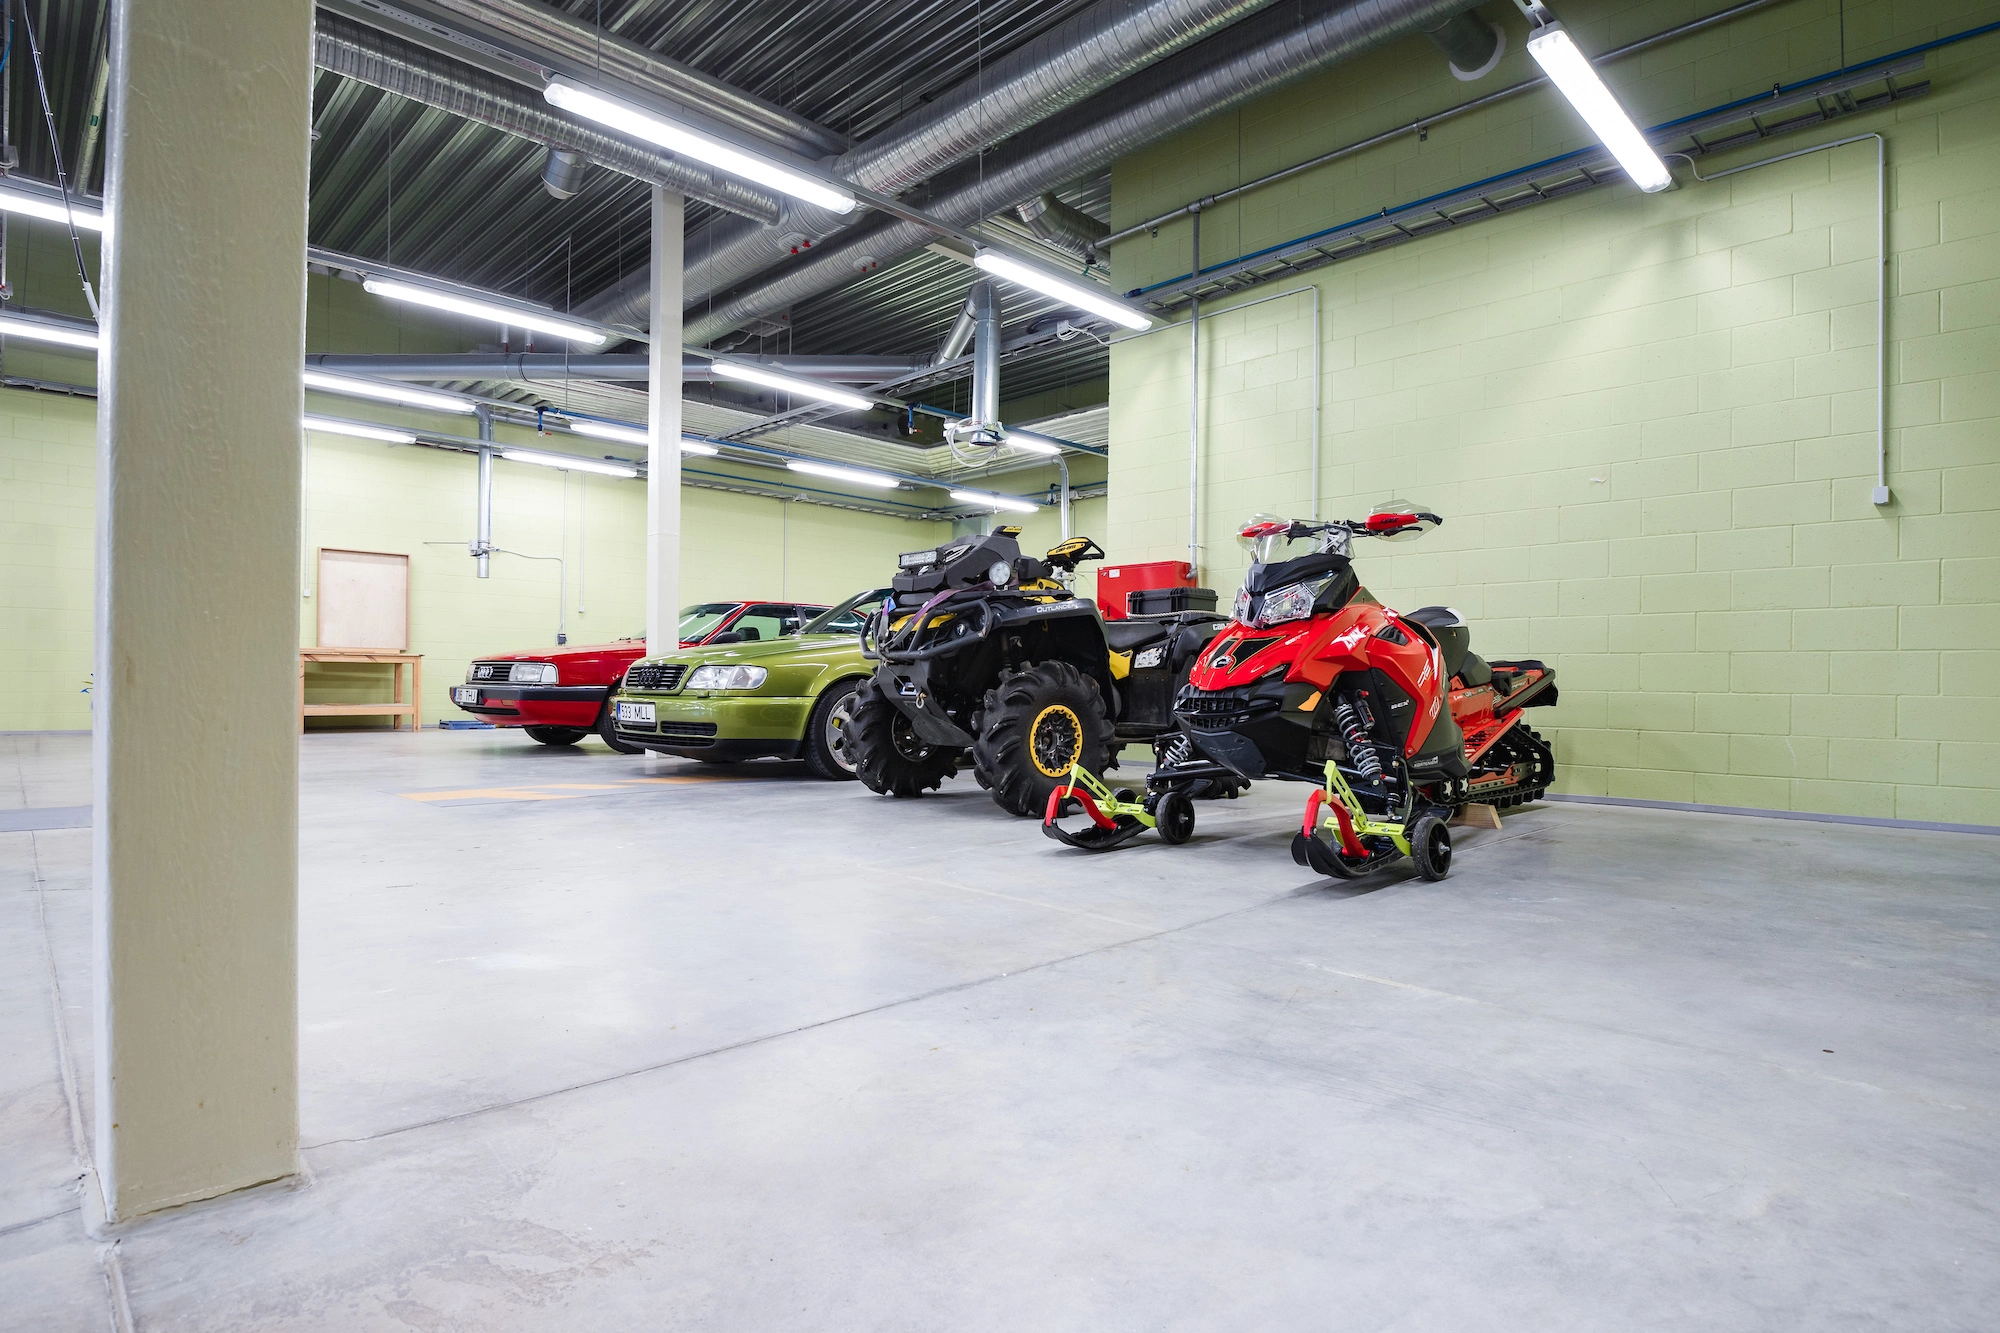 Car storage room suitable also for motorcycles, boats, caravans